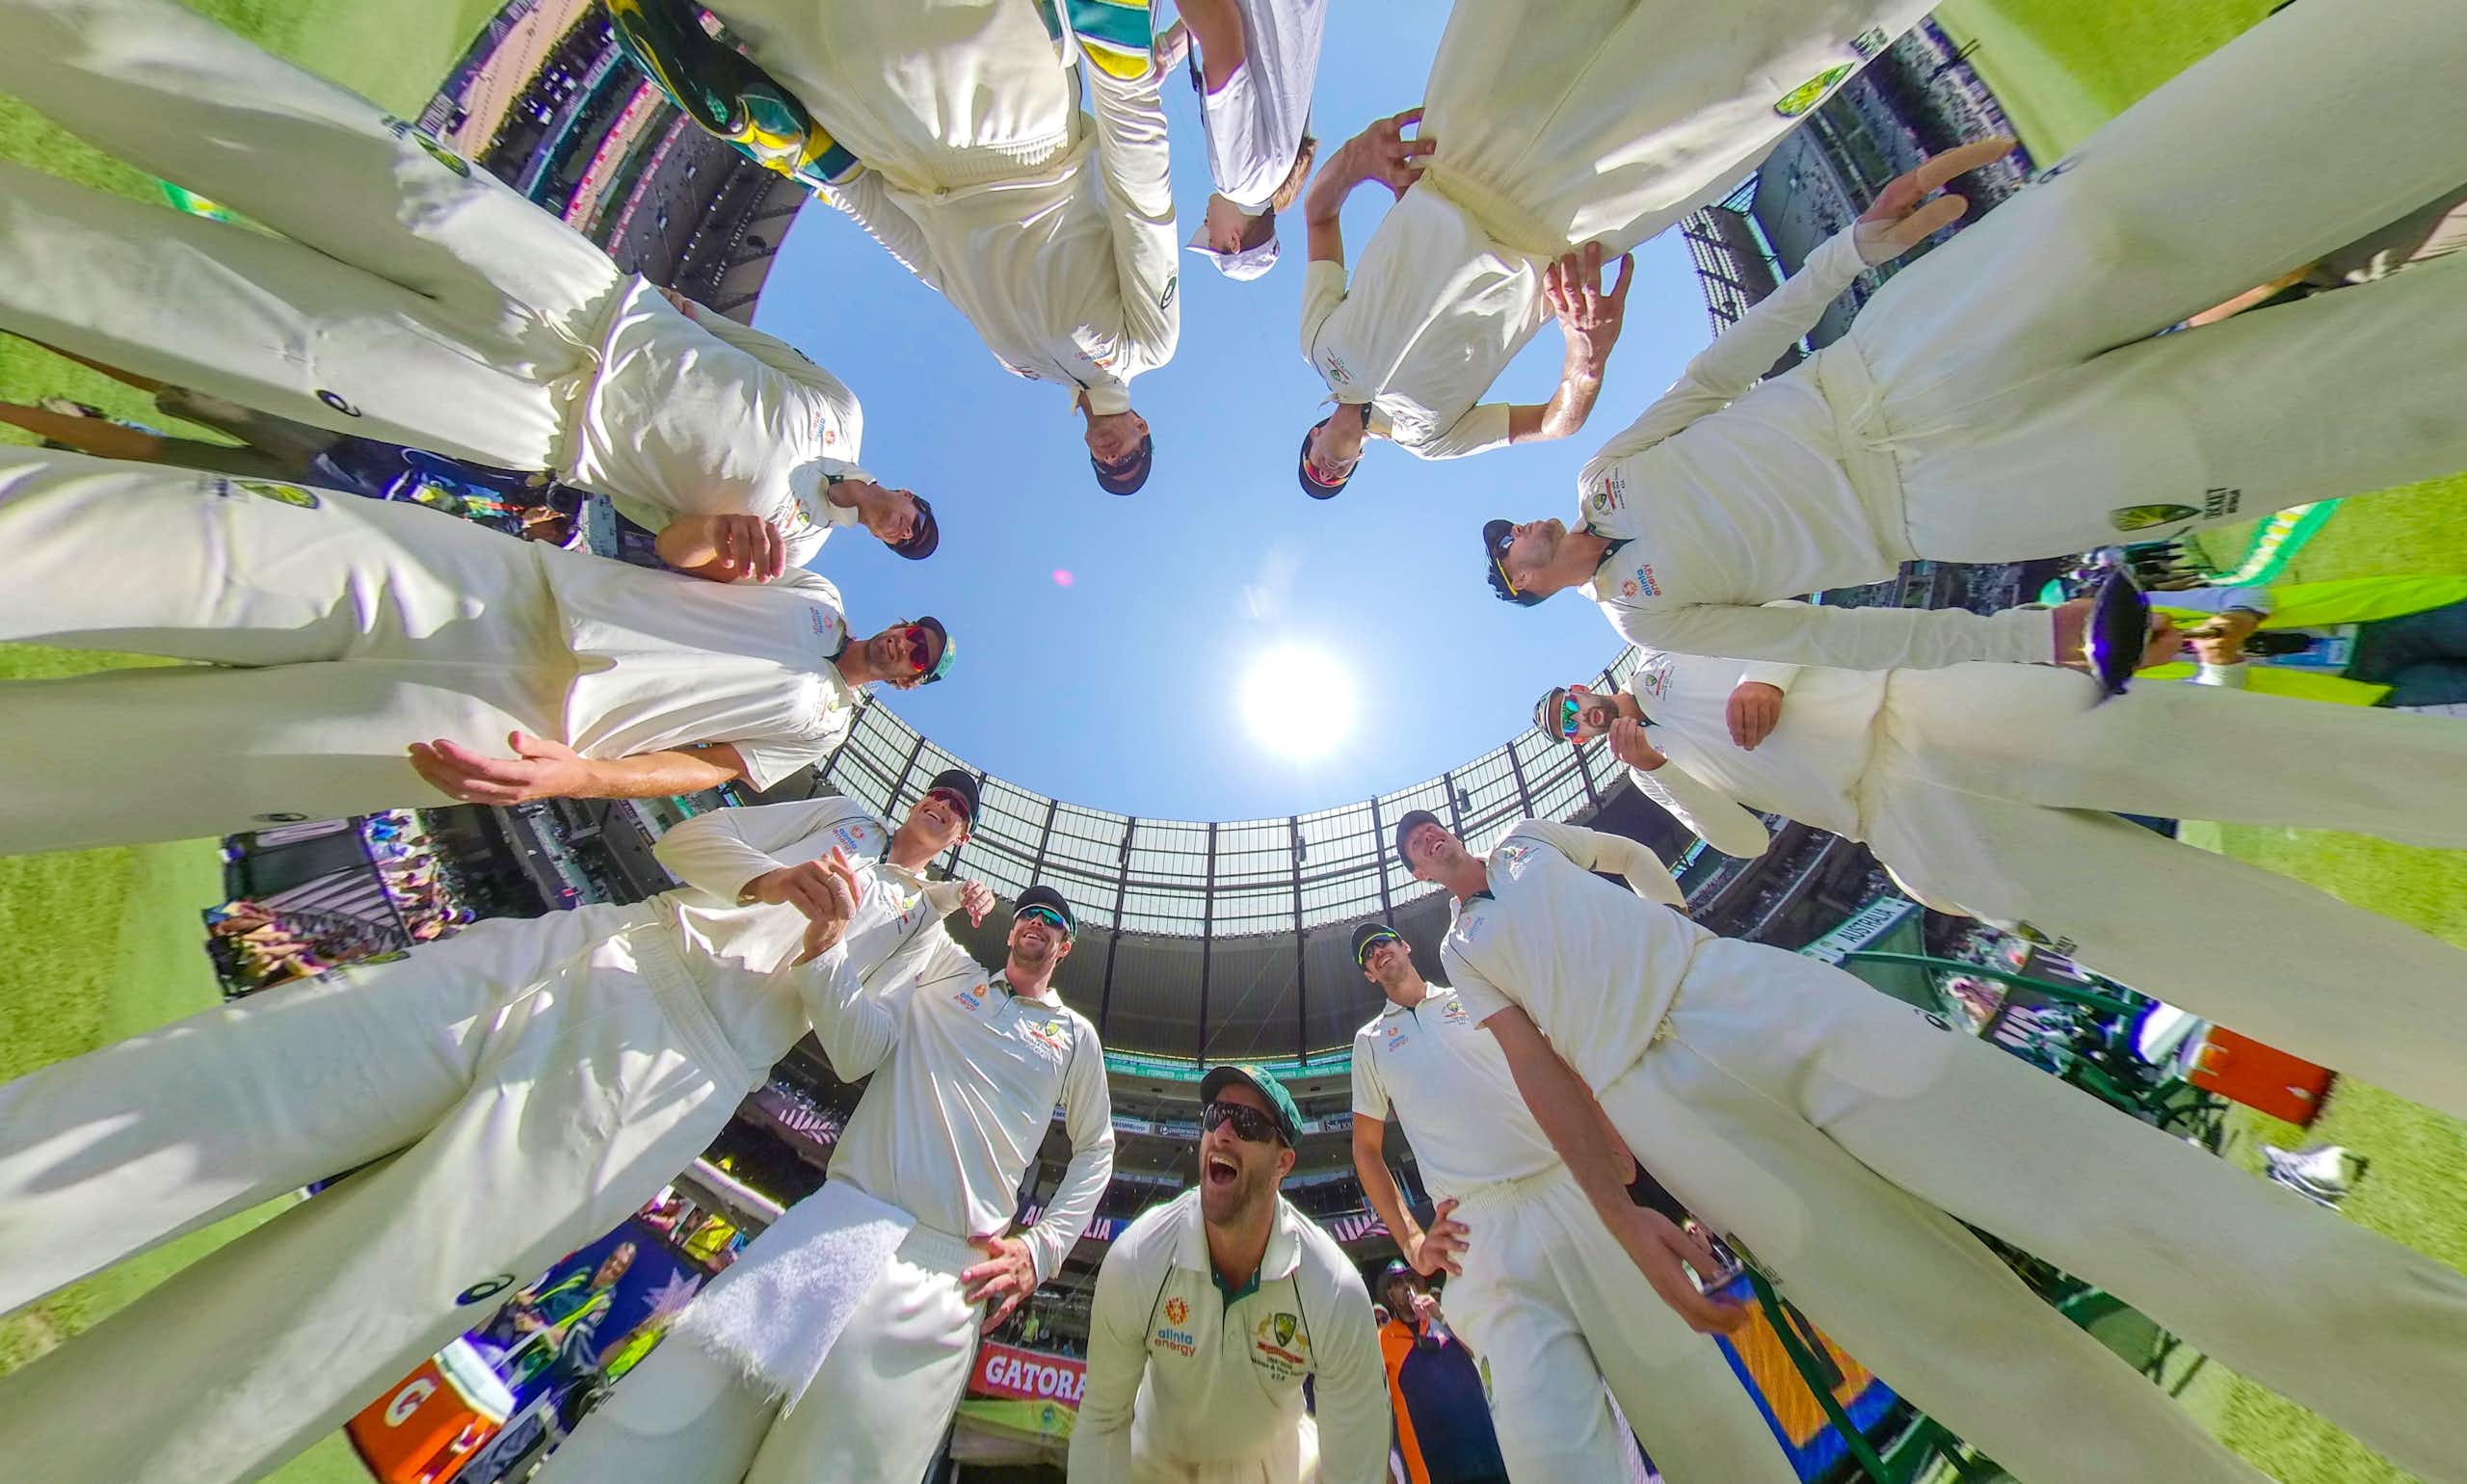 Tim Paine, captain of Australia speaks to his team in a huddle as Matthew Wade of Australia and his teammates look on during day 4 of the Boxing Day Test match between Australia and New Zealand at the MCG in Melbourne, Sunday, December 29, 2019.